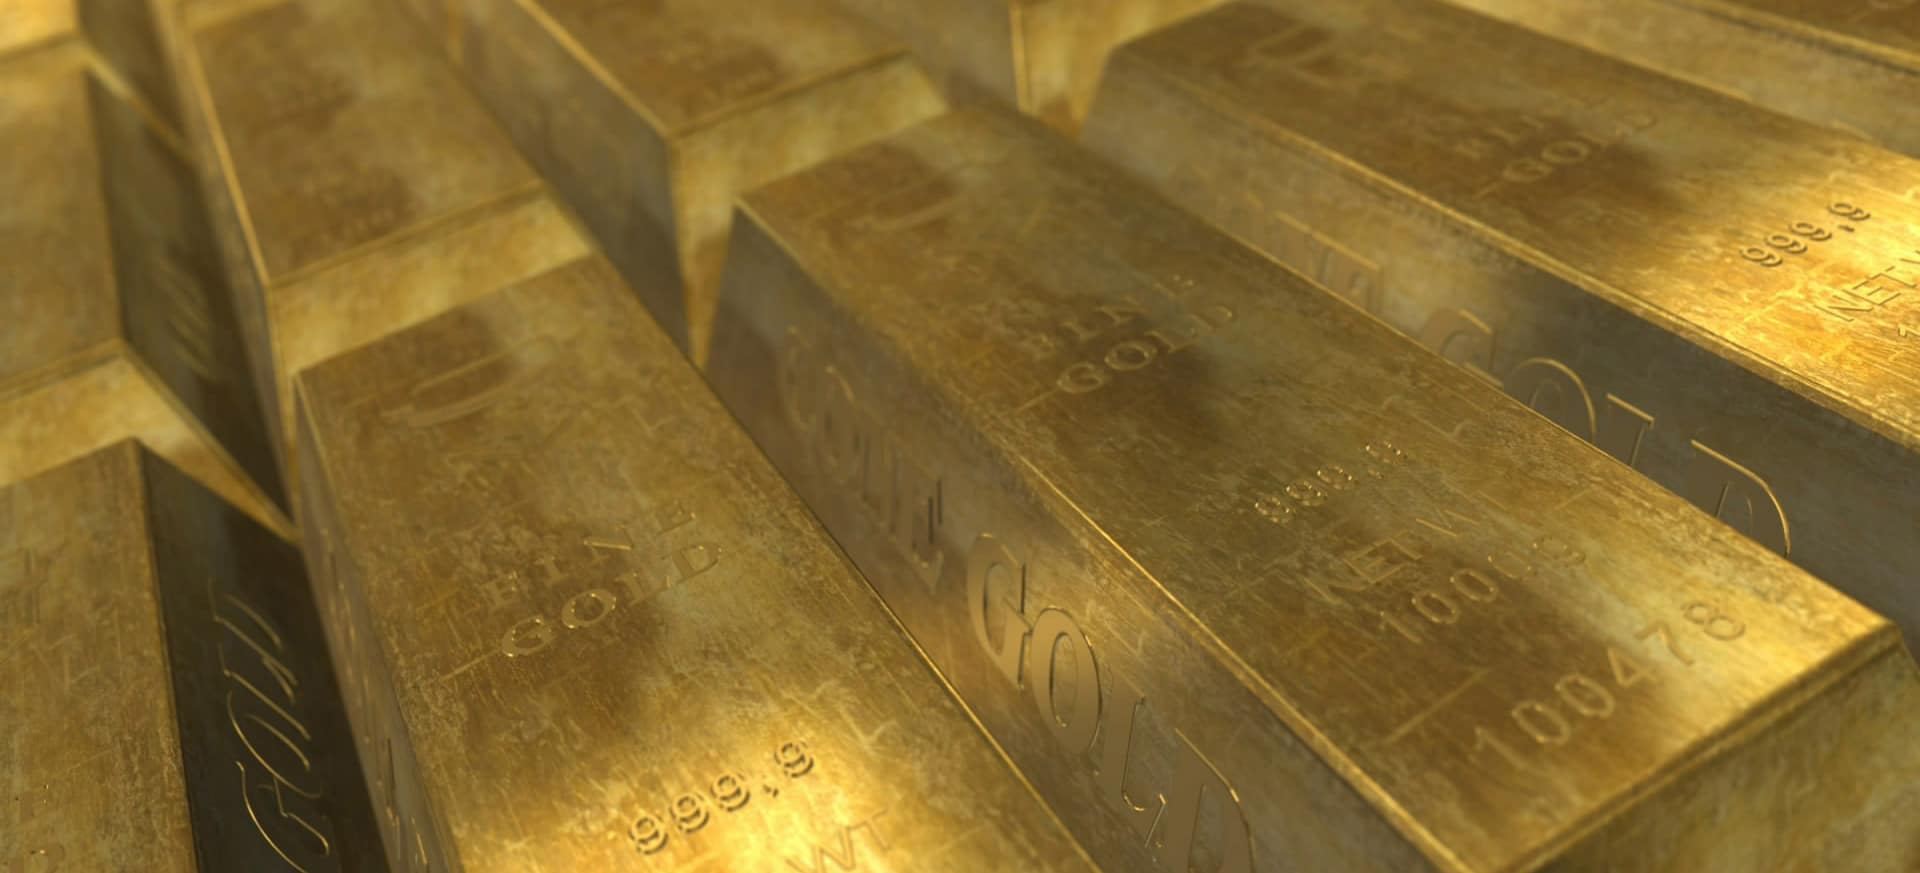 BitGold Acquires GoldMoney for CAD $51.9M, Shares Jump 29%